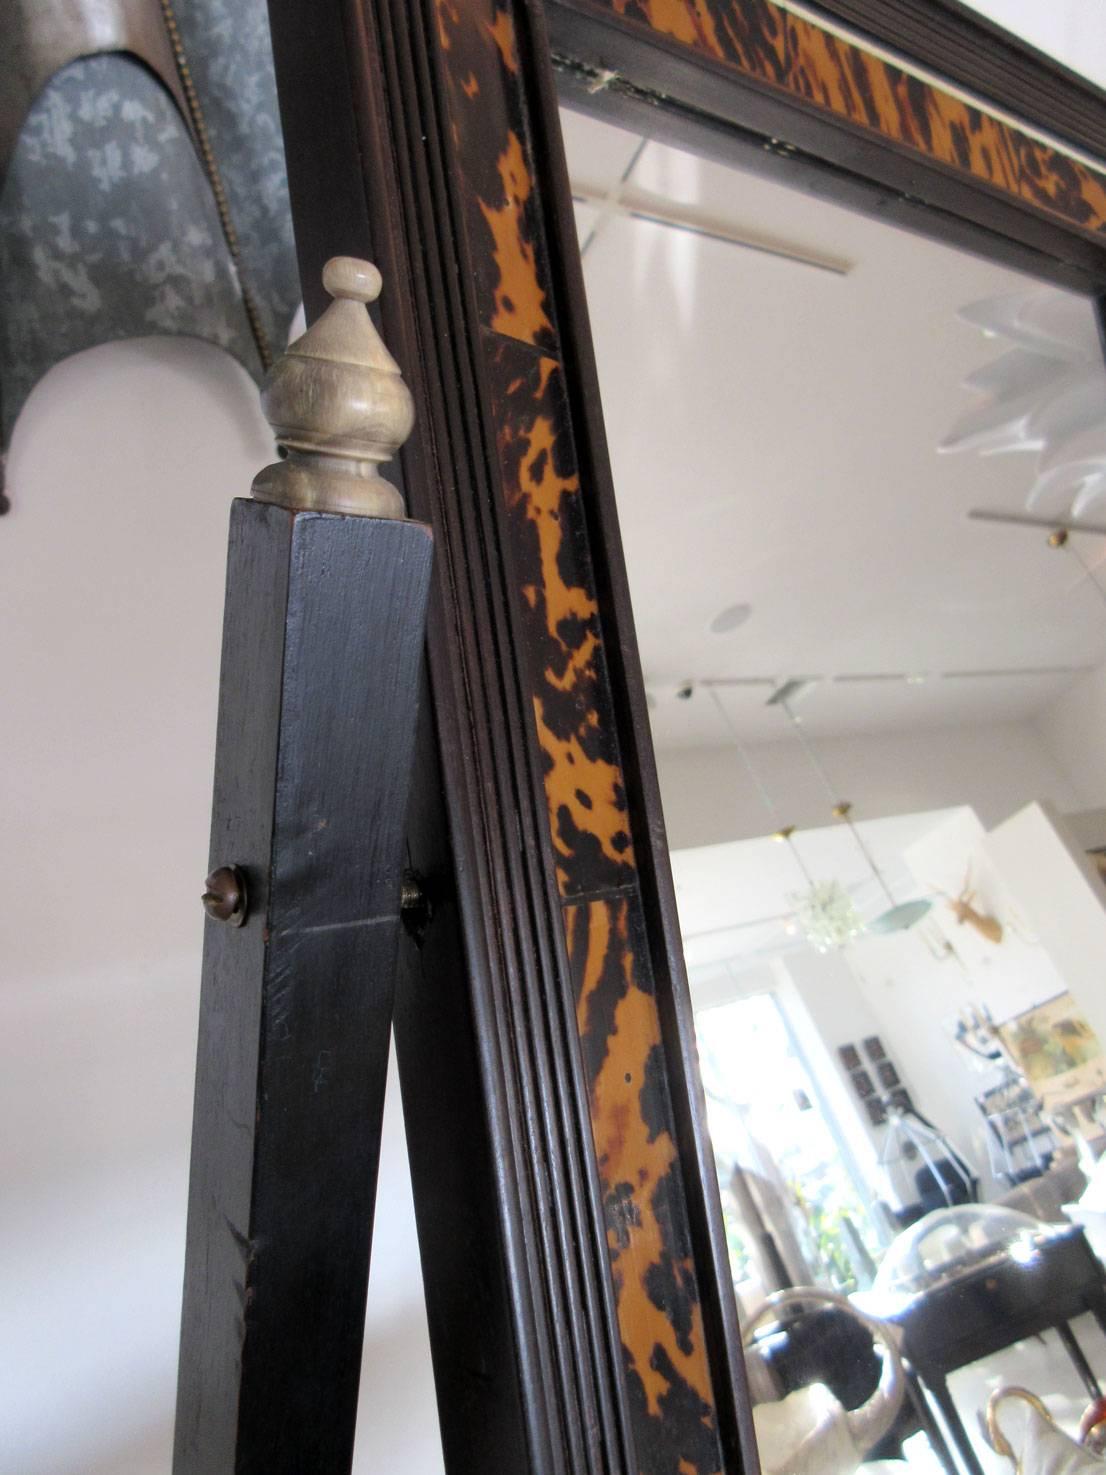 Turn of the century gentleman's mirror with tortoise shell inlay. The mirror pivots and has one pull out drawer.